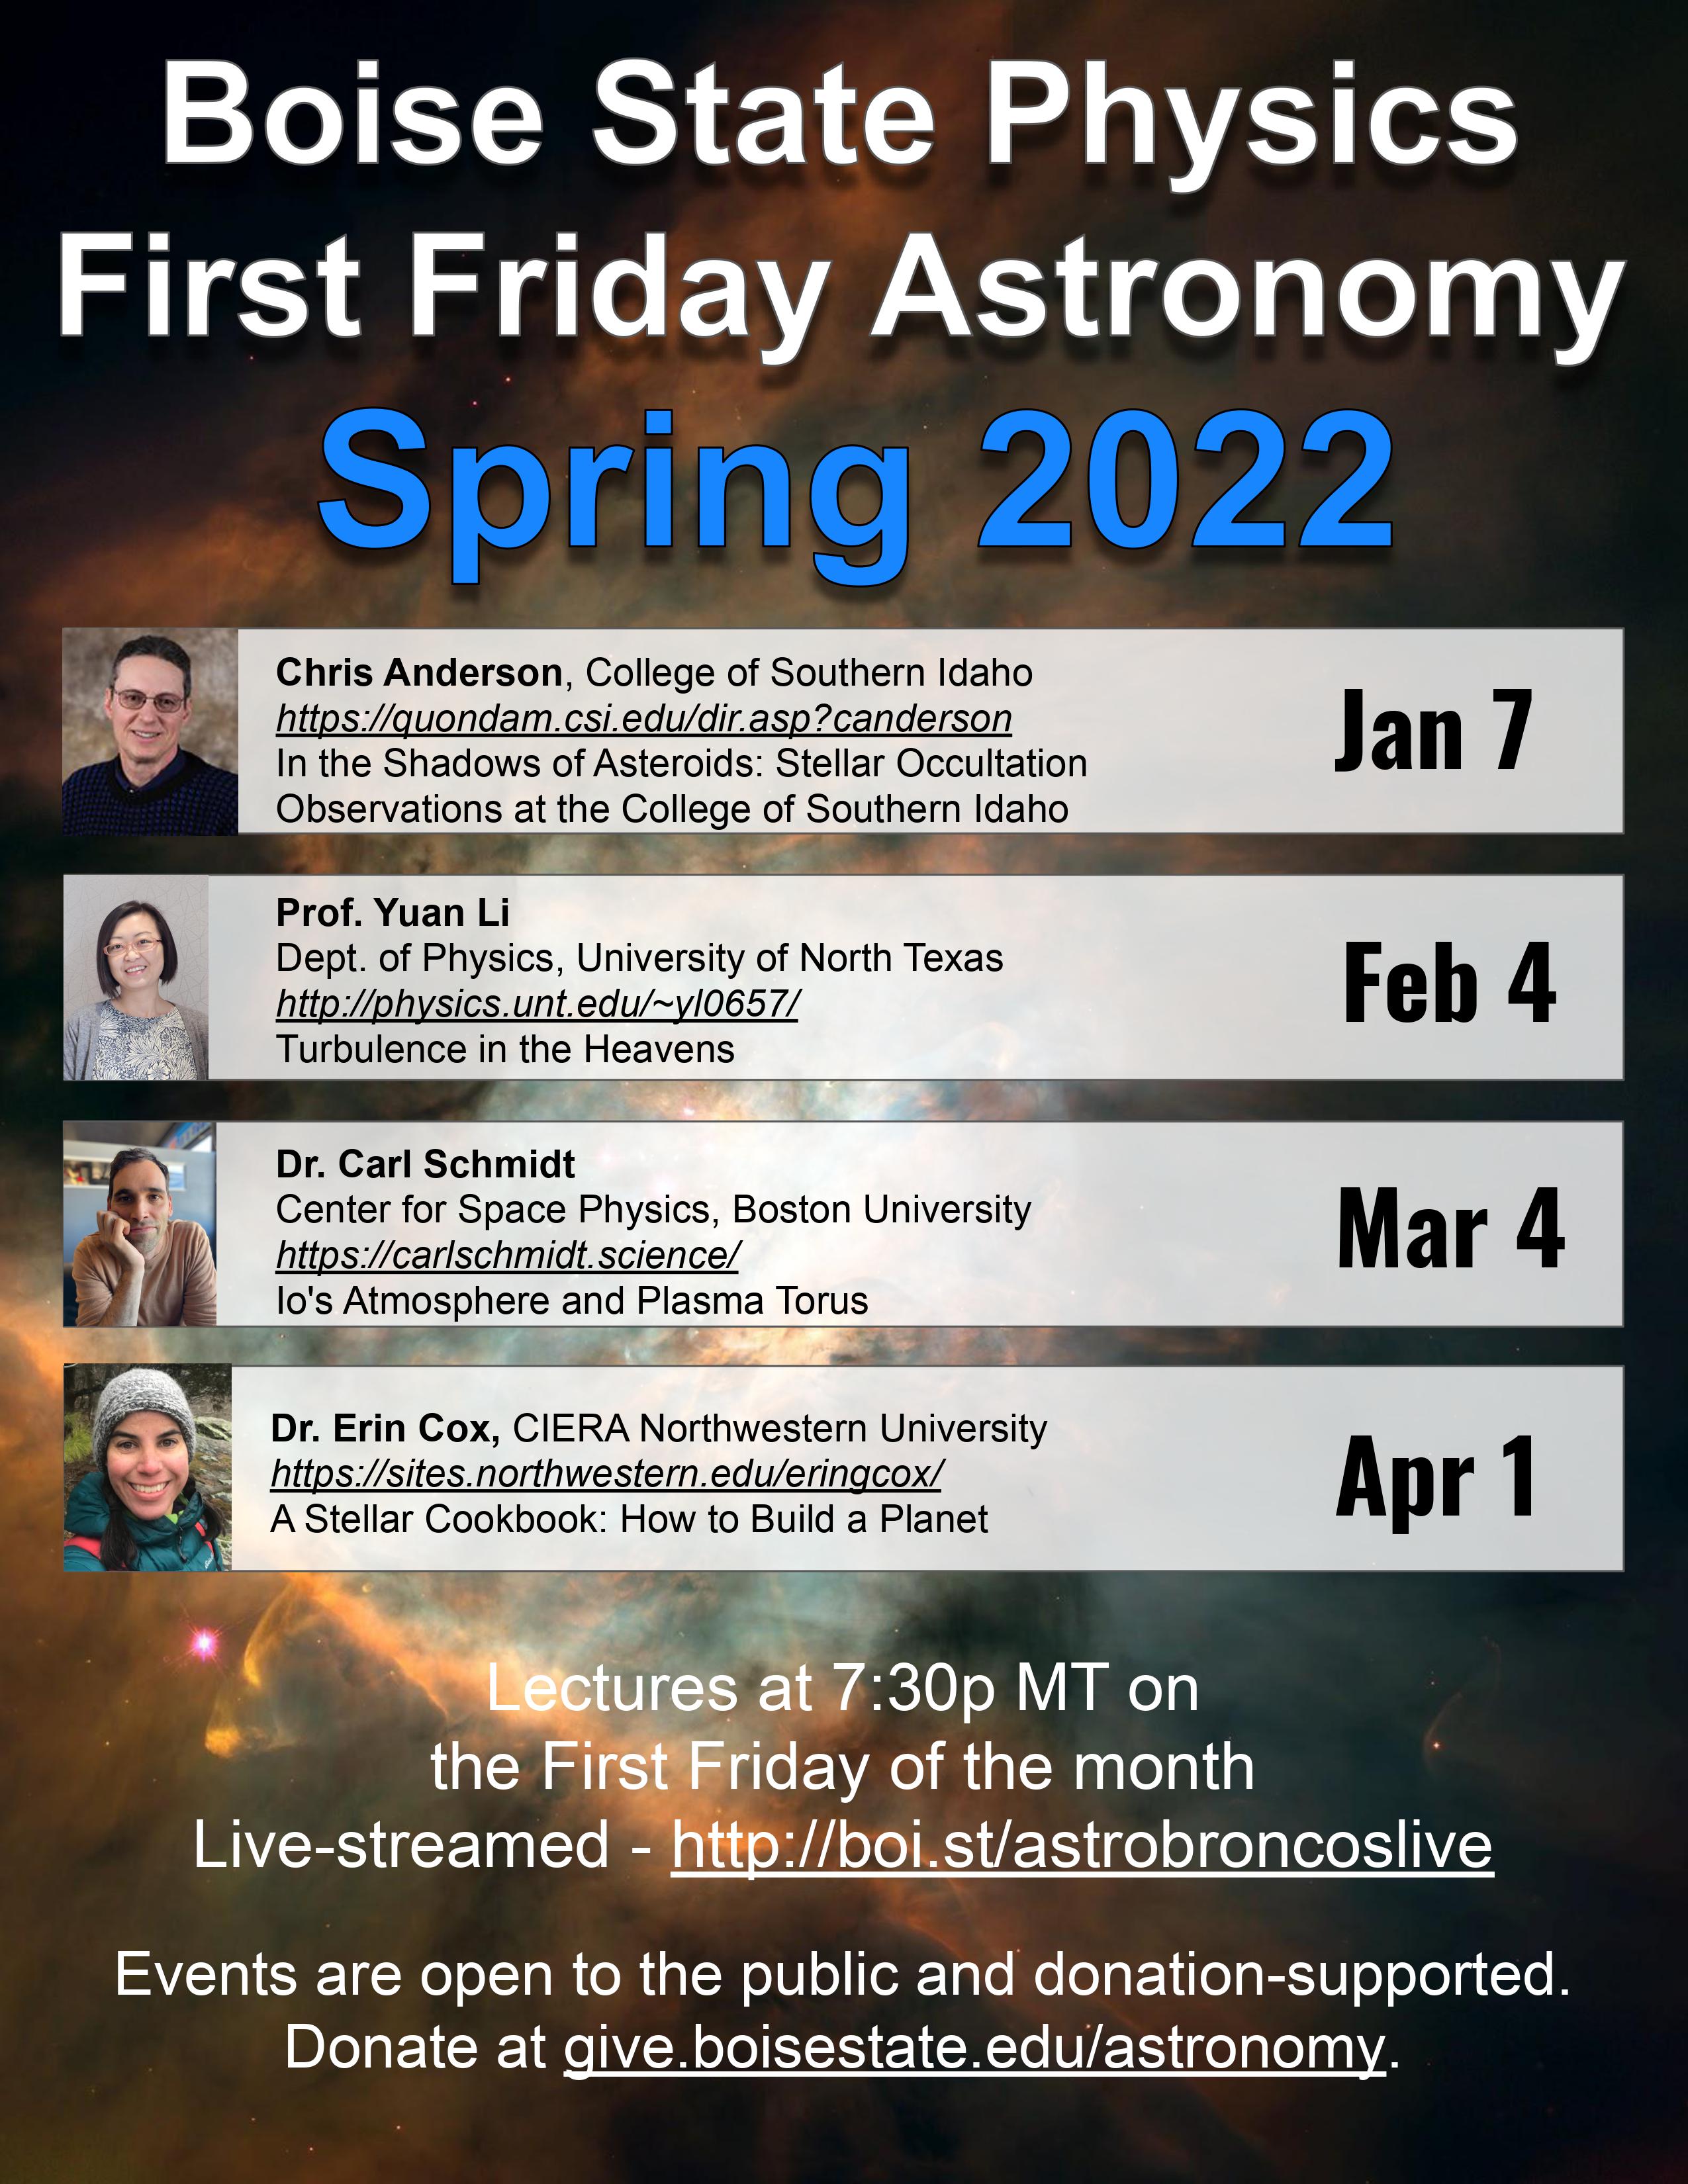 Boise State Physics, First Friday Astronomy Spring 2022, Jan 7th - Chris Anderson, Feb 4th - Prof. Yuan Li, March 4th - Dr. Carl Schmidt, April 1st - Dr. Erin Cox. Lectures at 7:30pm on the first Friday of the month.